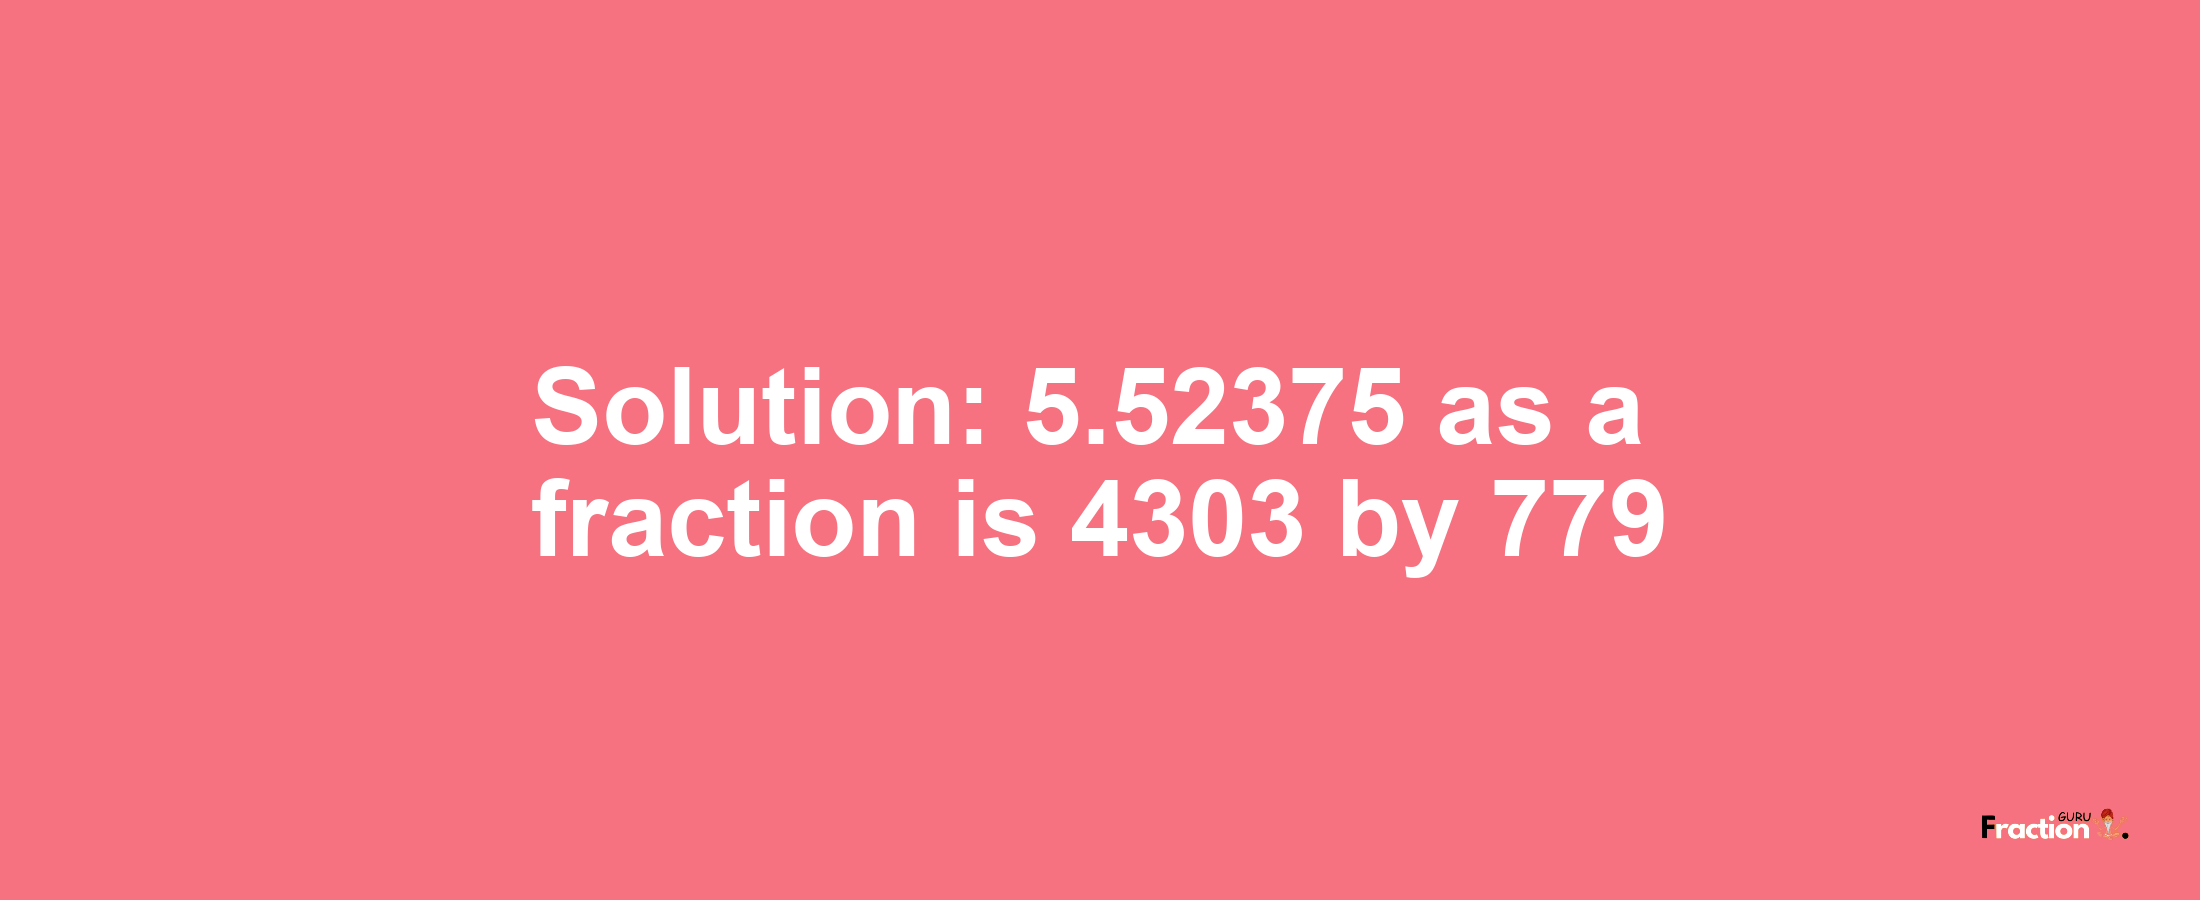 Solution:5.52375 as a fraction is 4303/779